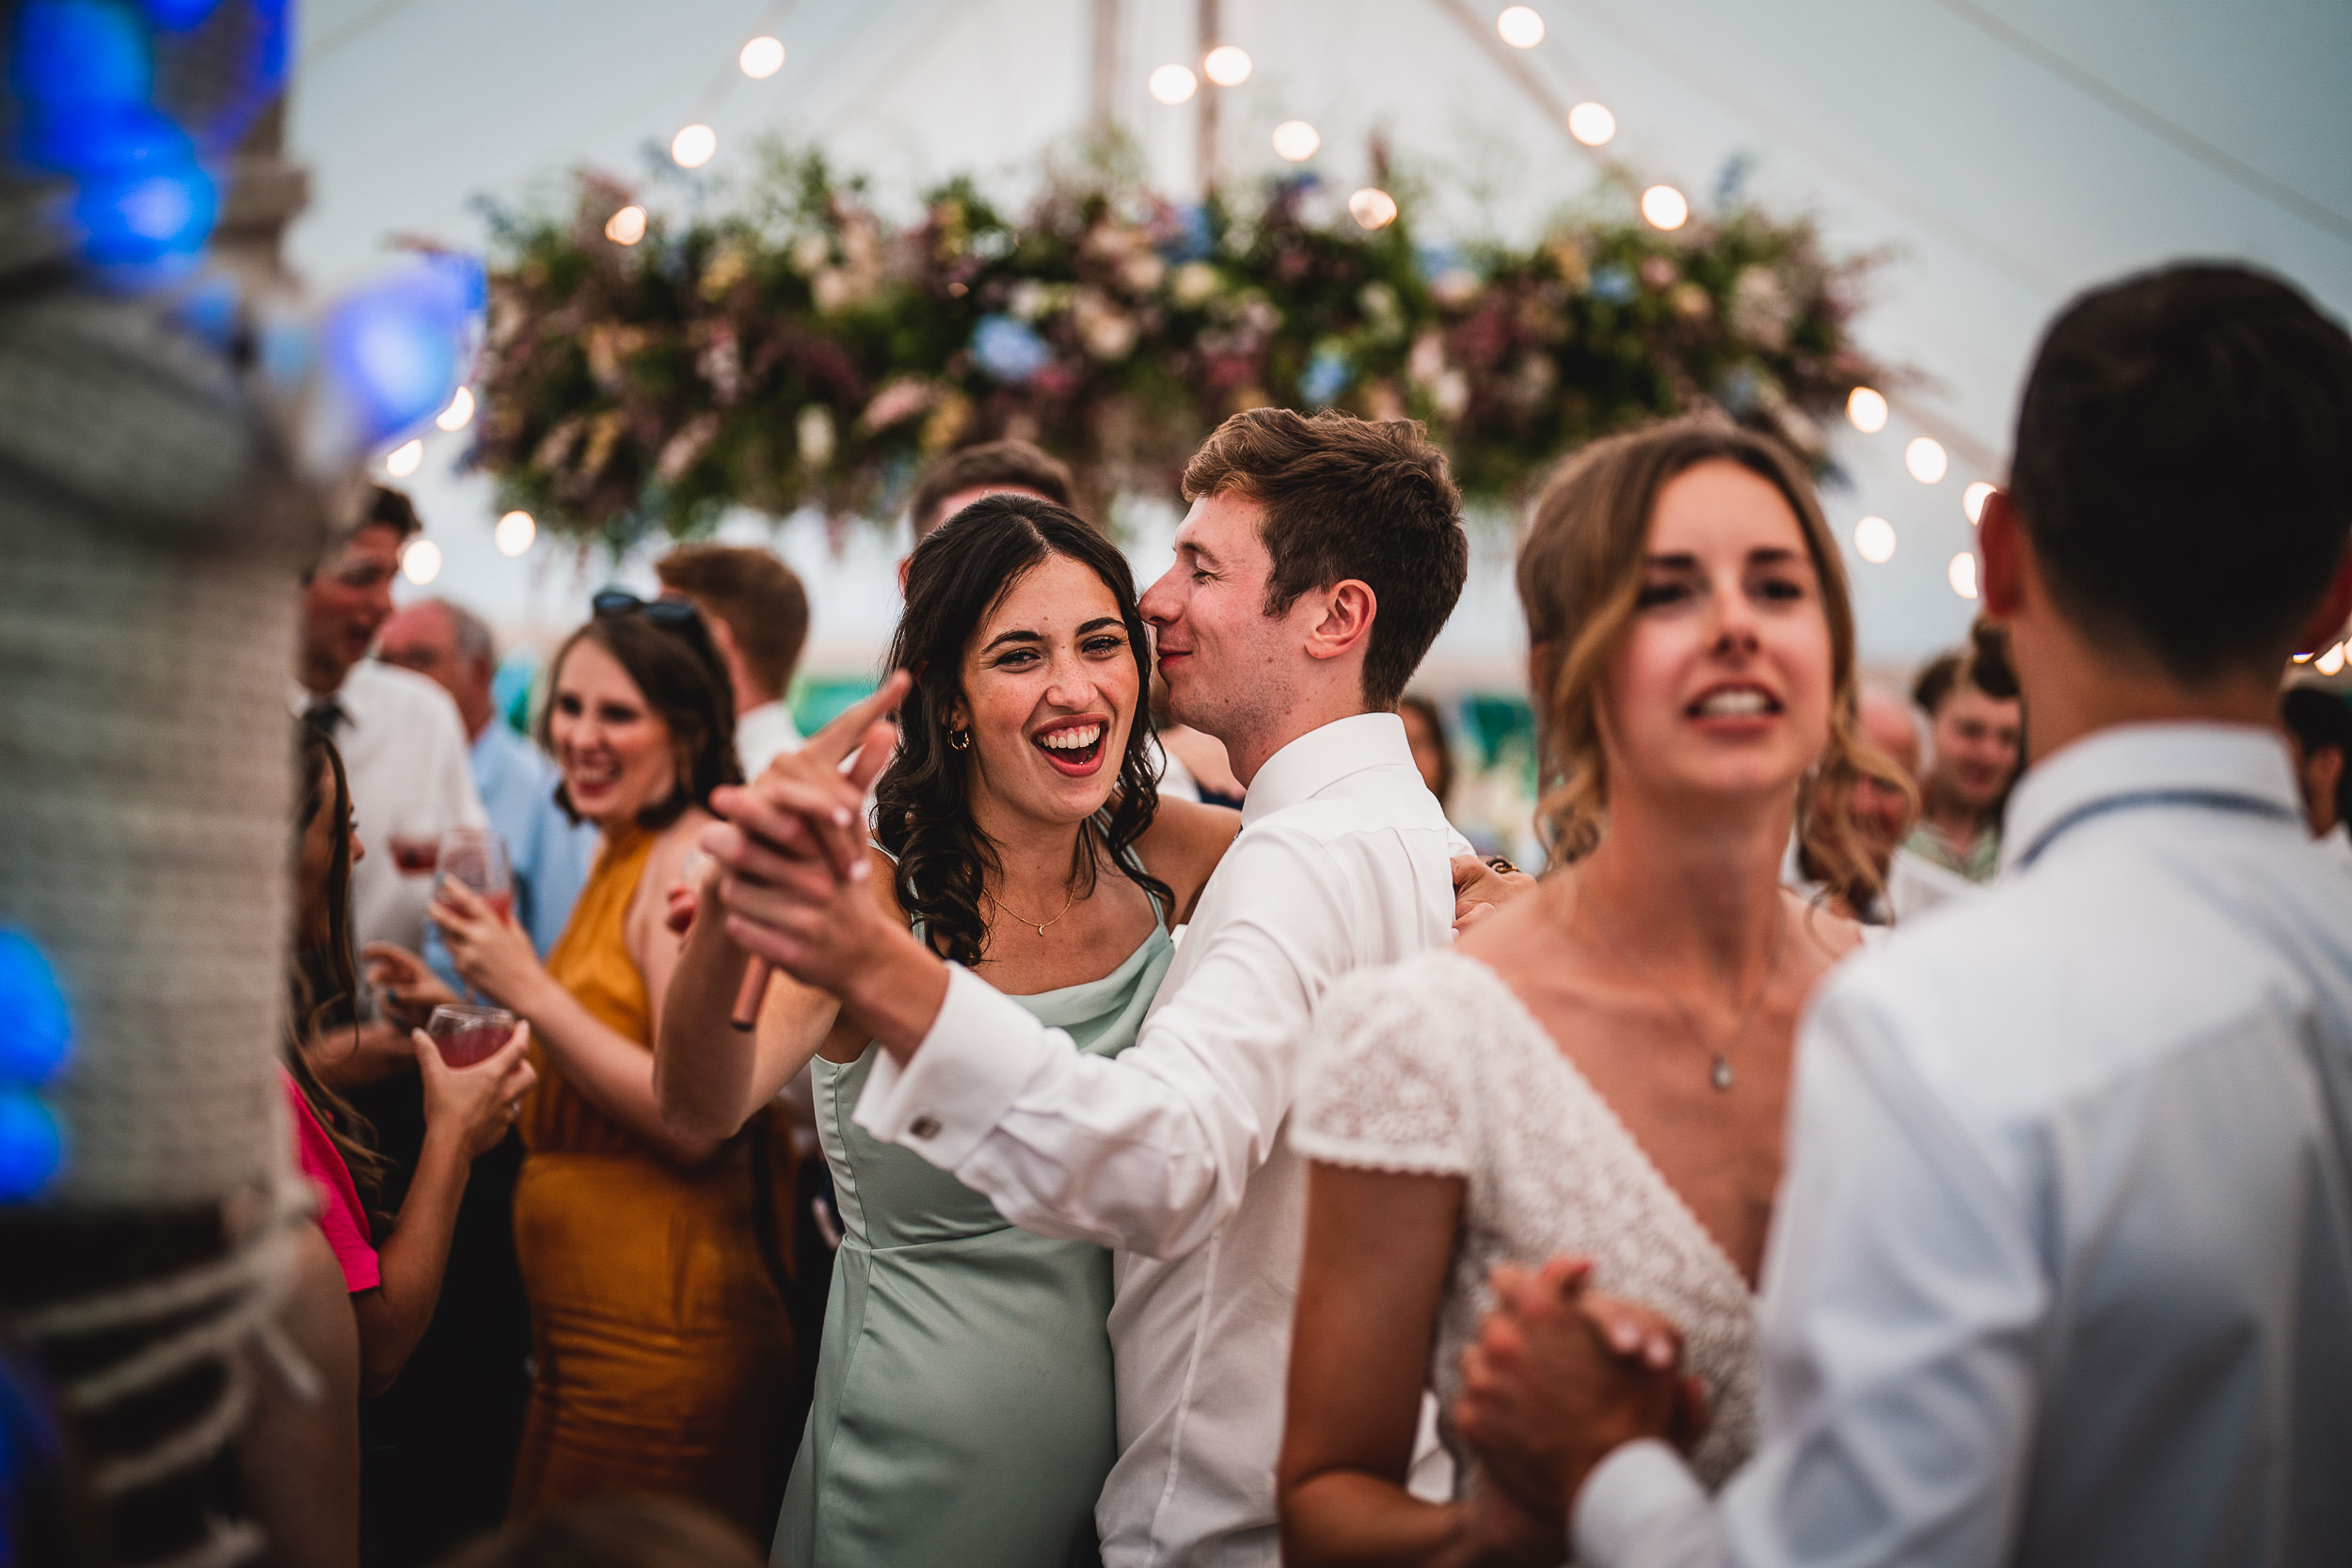 A bride and groom dancing at their wedding reception, captured by a wedding photographer.